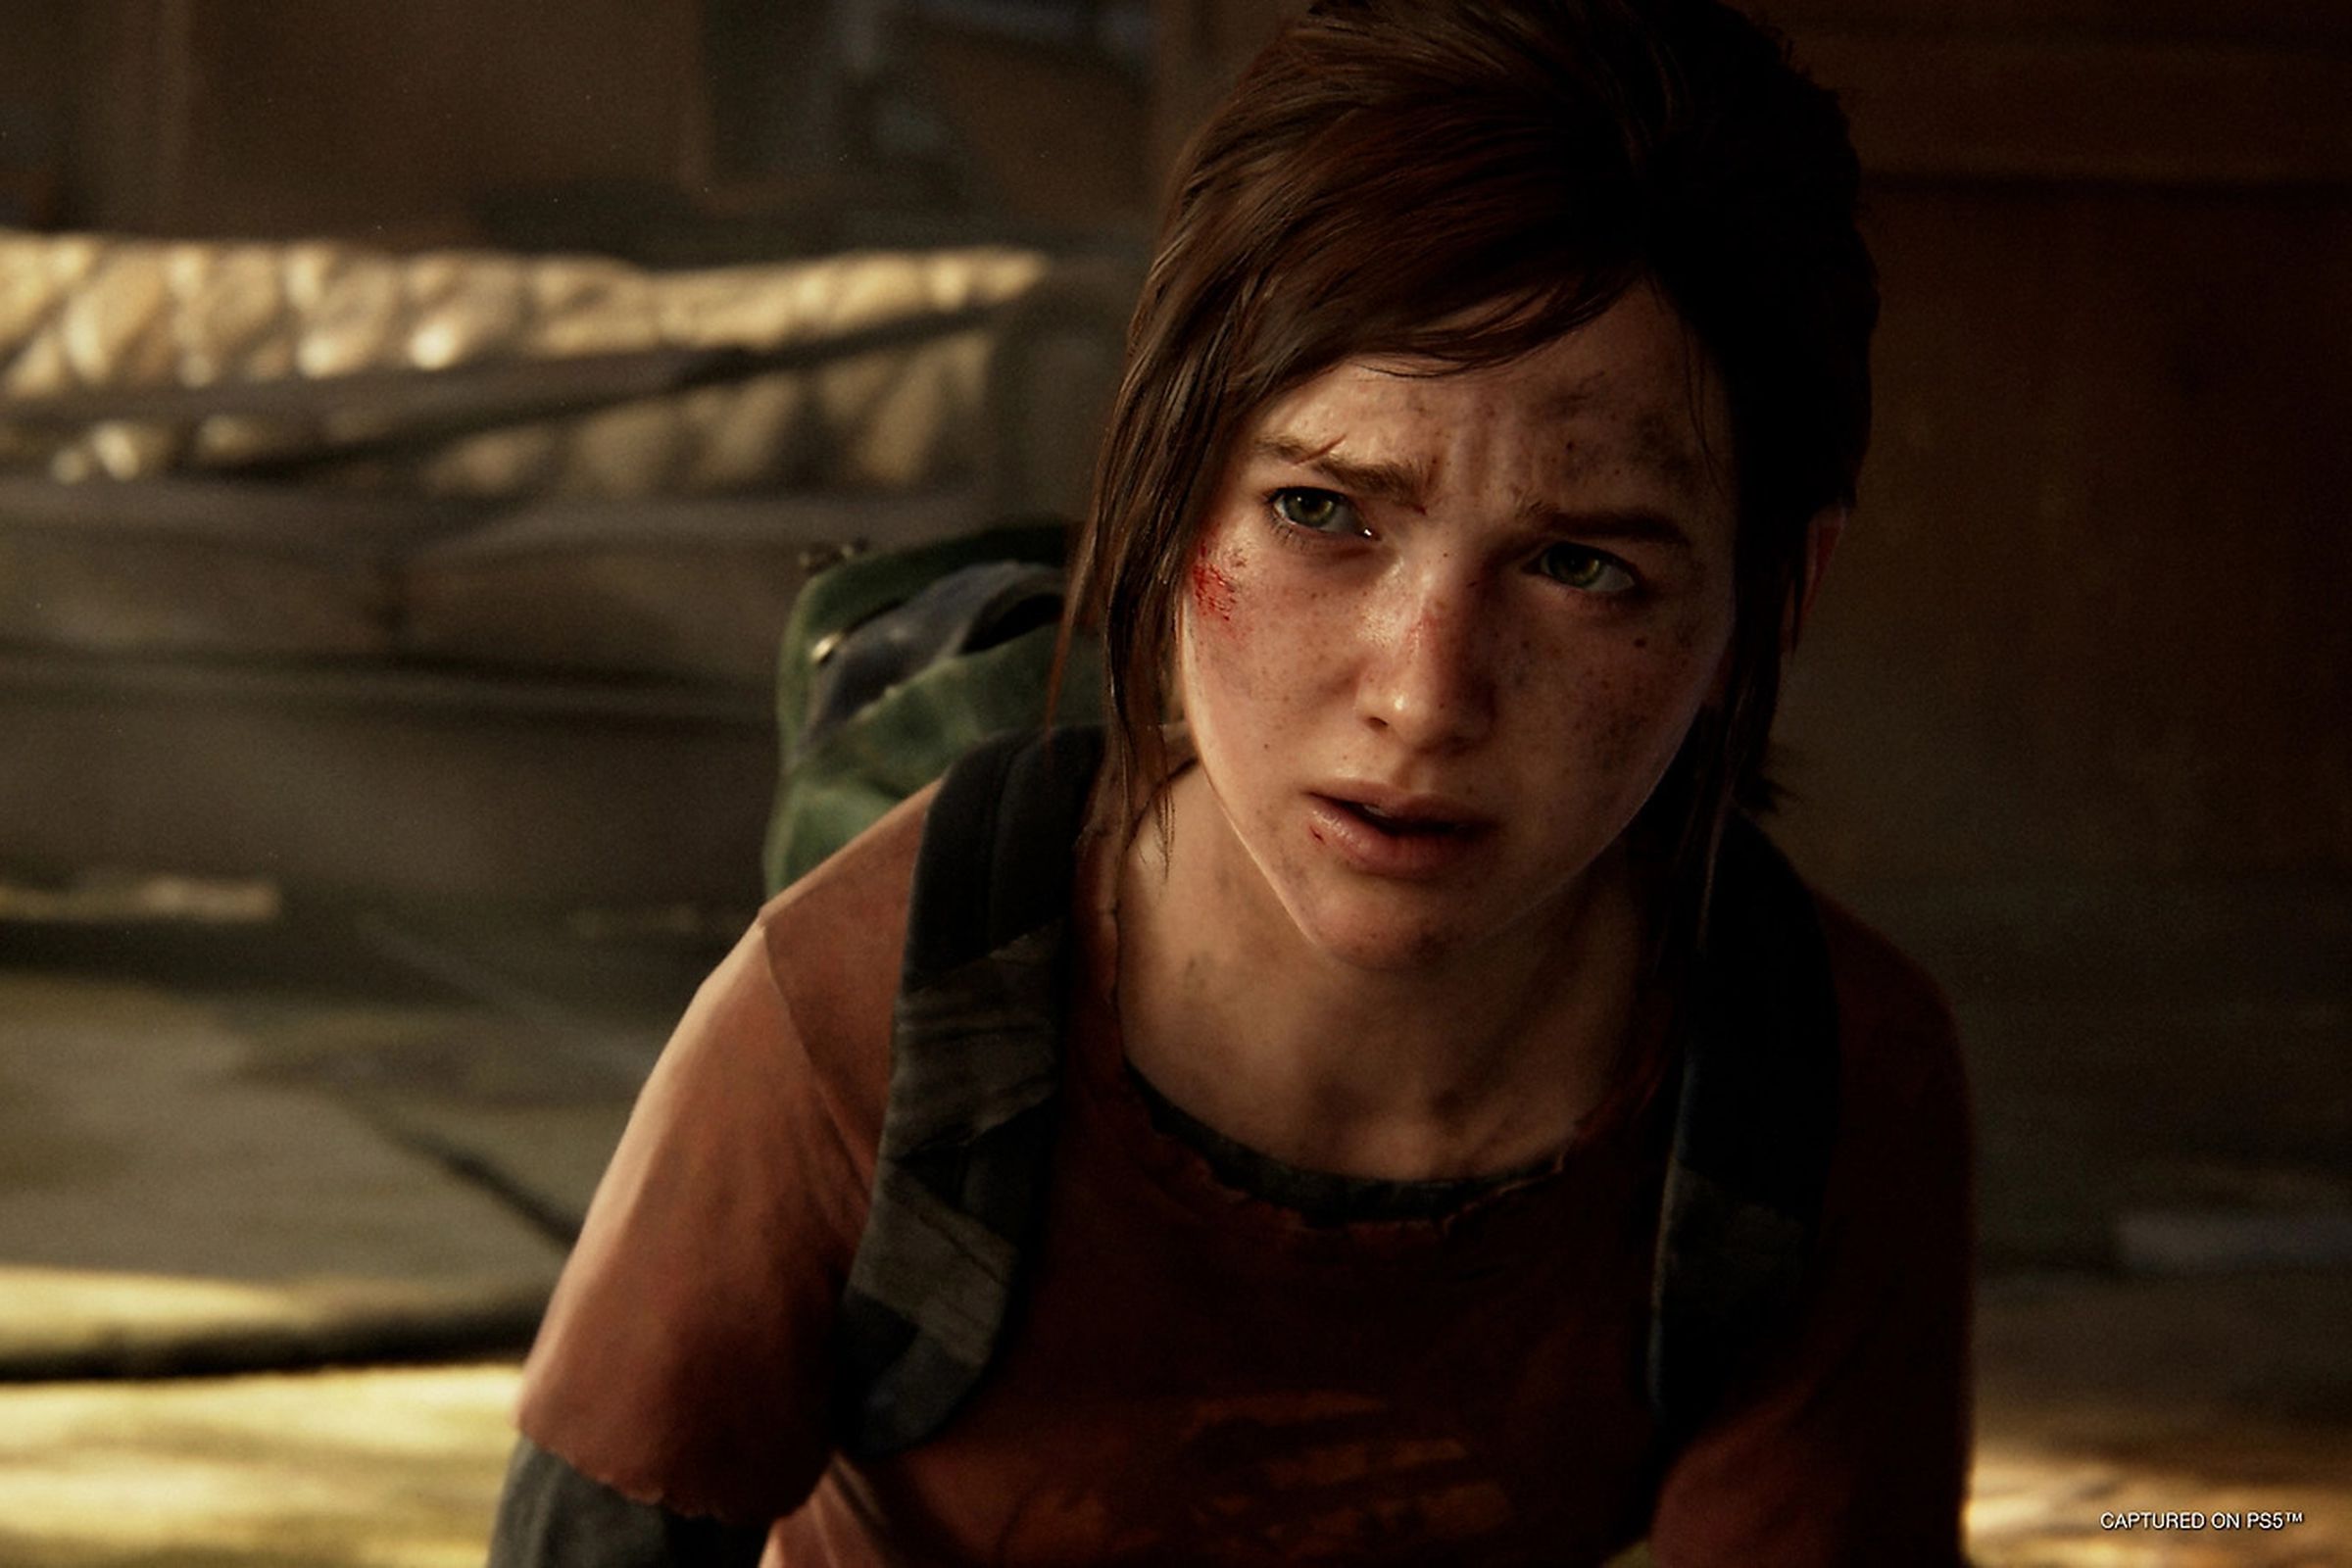 A screenshot showing Ellie in The Last of Us Part I